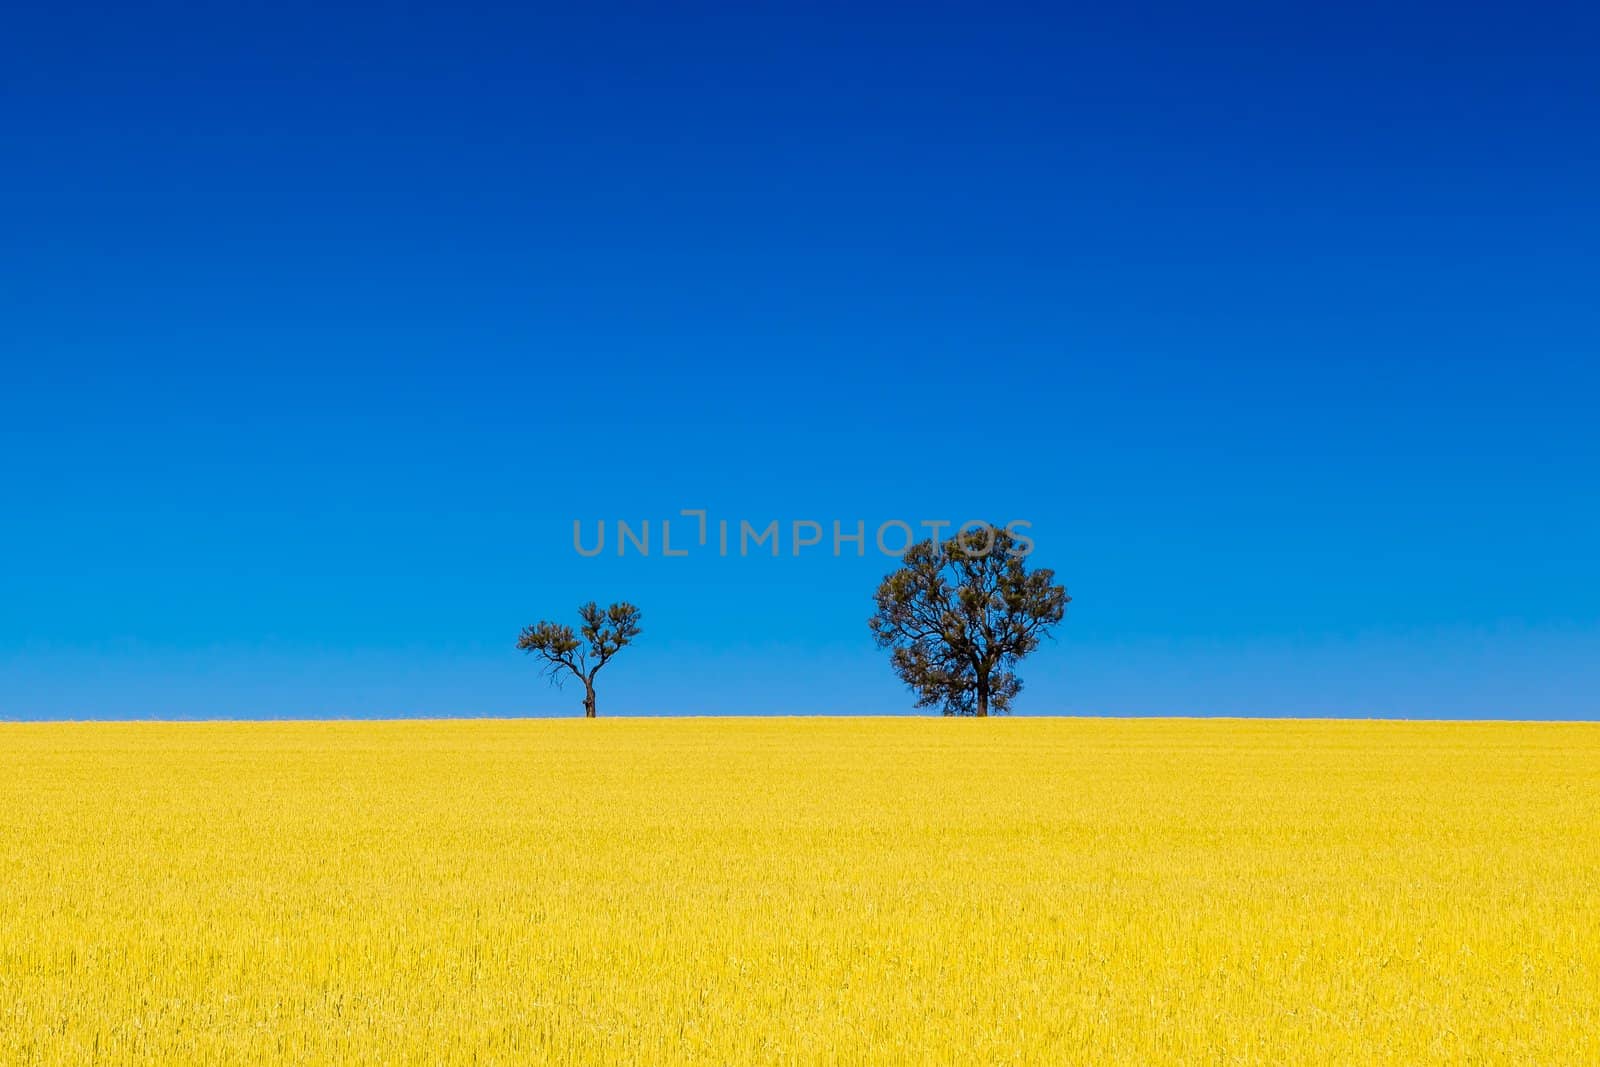 Trees in a bright yellow wheat field with blue sky by hangingpixels